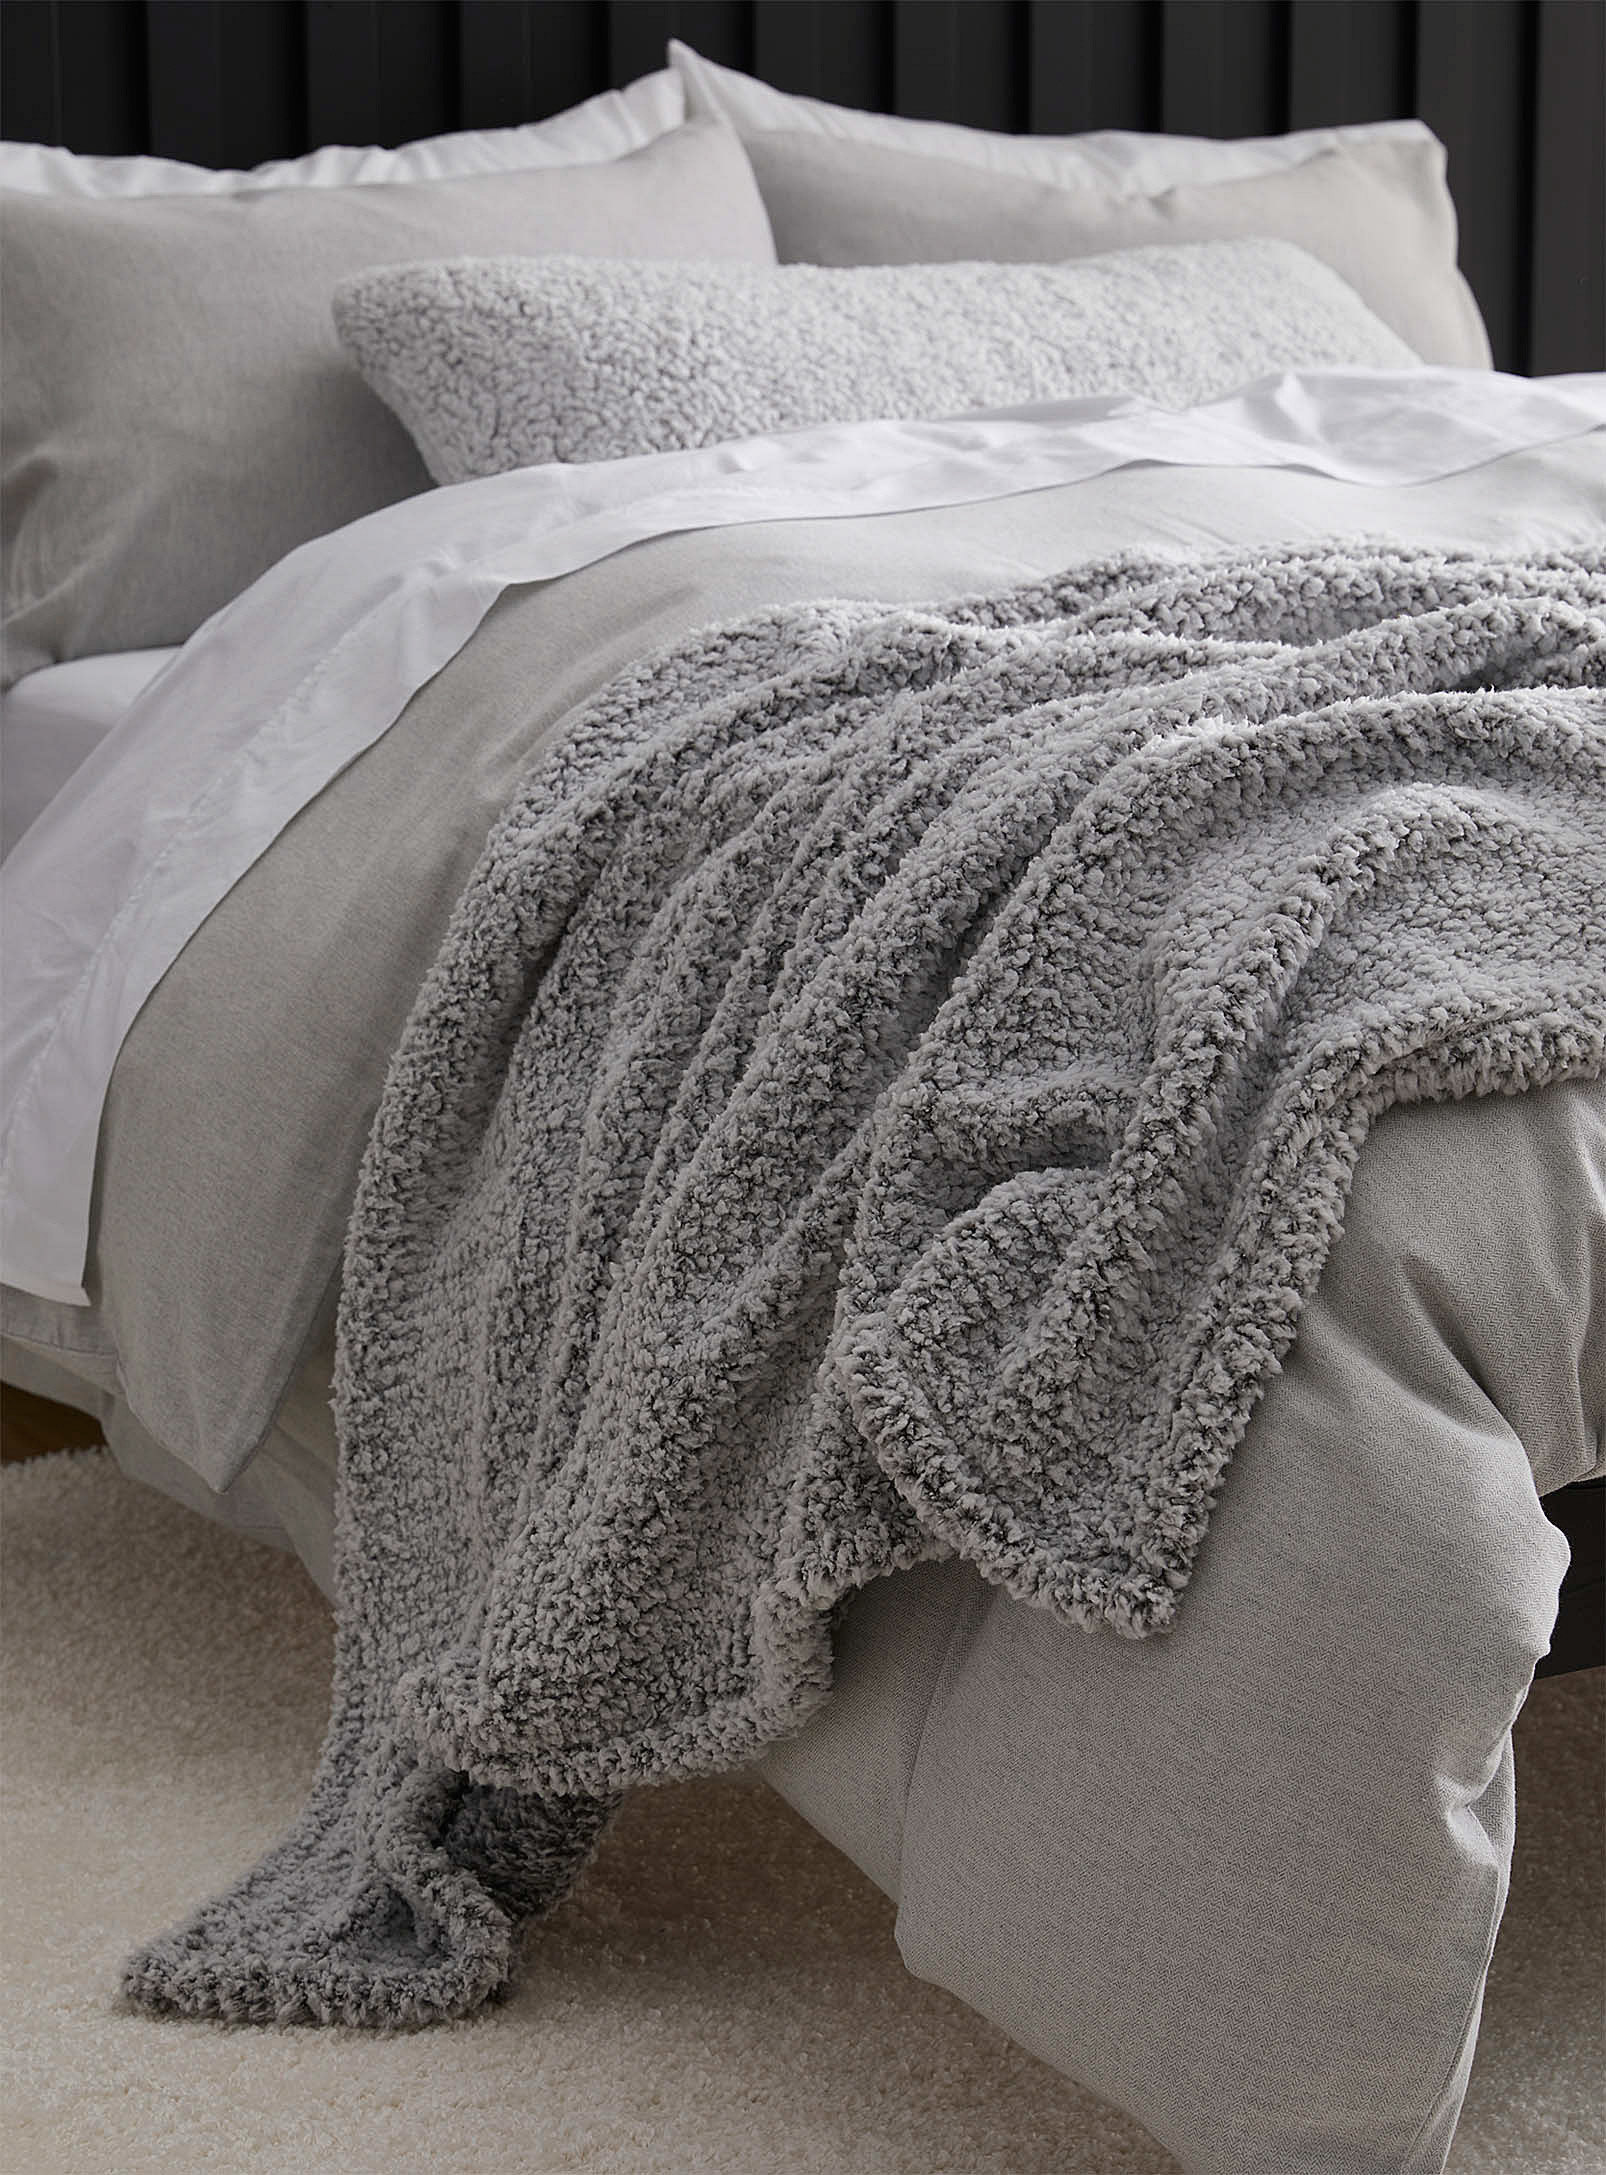 a plush sherpa blanket draped over a neatly made bed